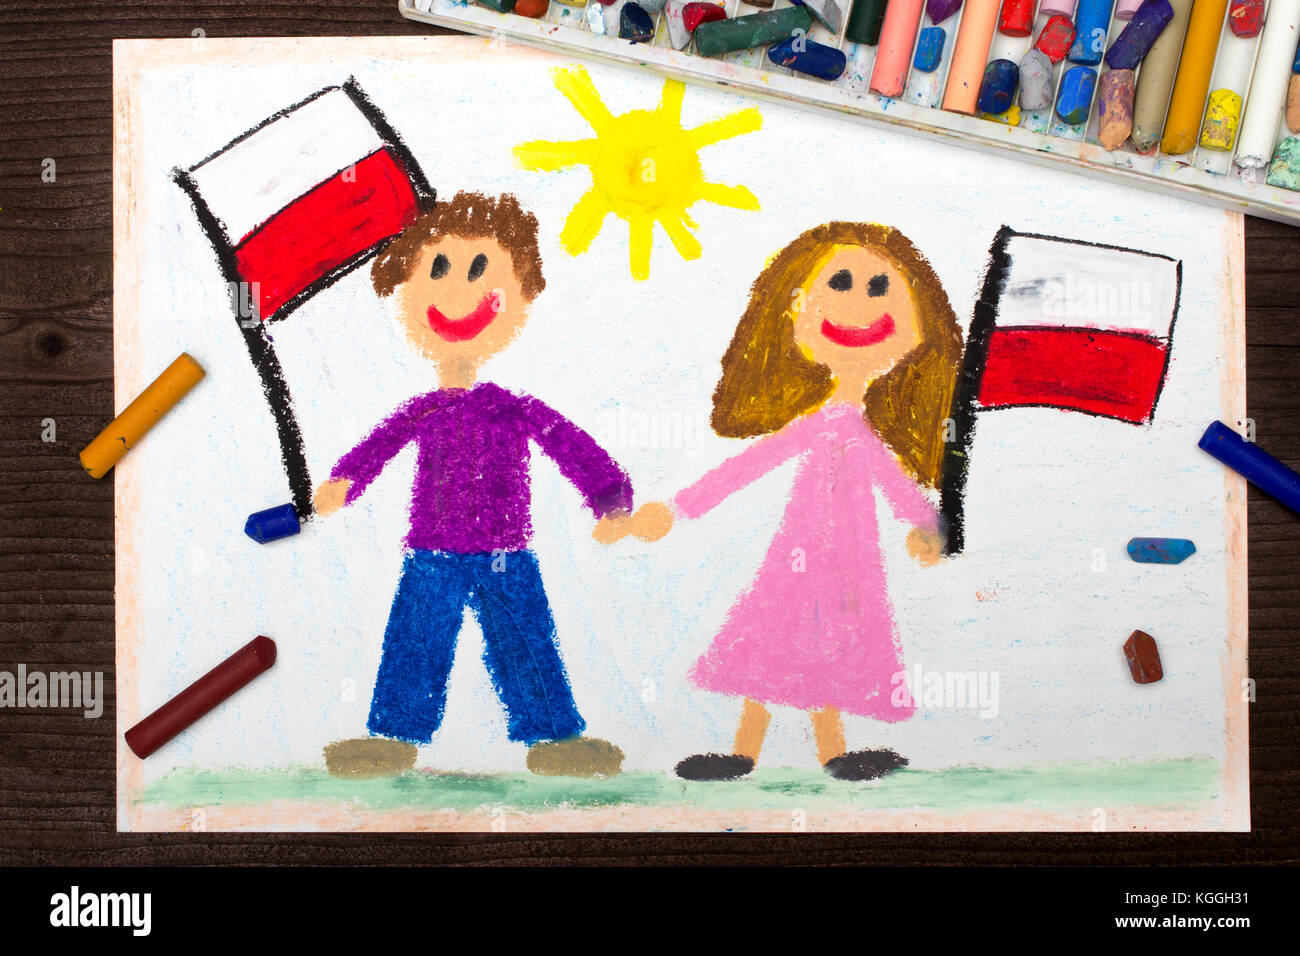 Colorful Drawing Smiling Children Boy And Girl Waving Polish Stock Photo Alamy Easy drawing independence day celebrations | indian national flag drawing for kids step by step drawing of independence. alamy